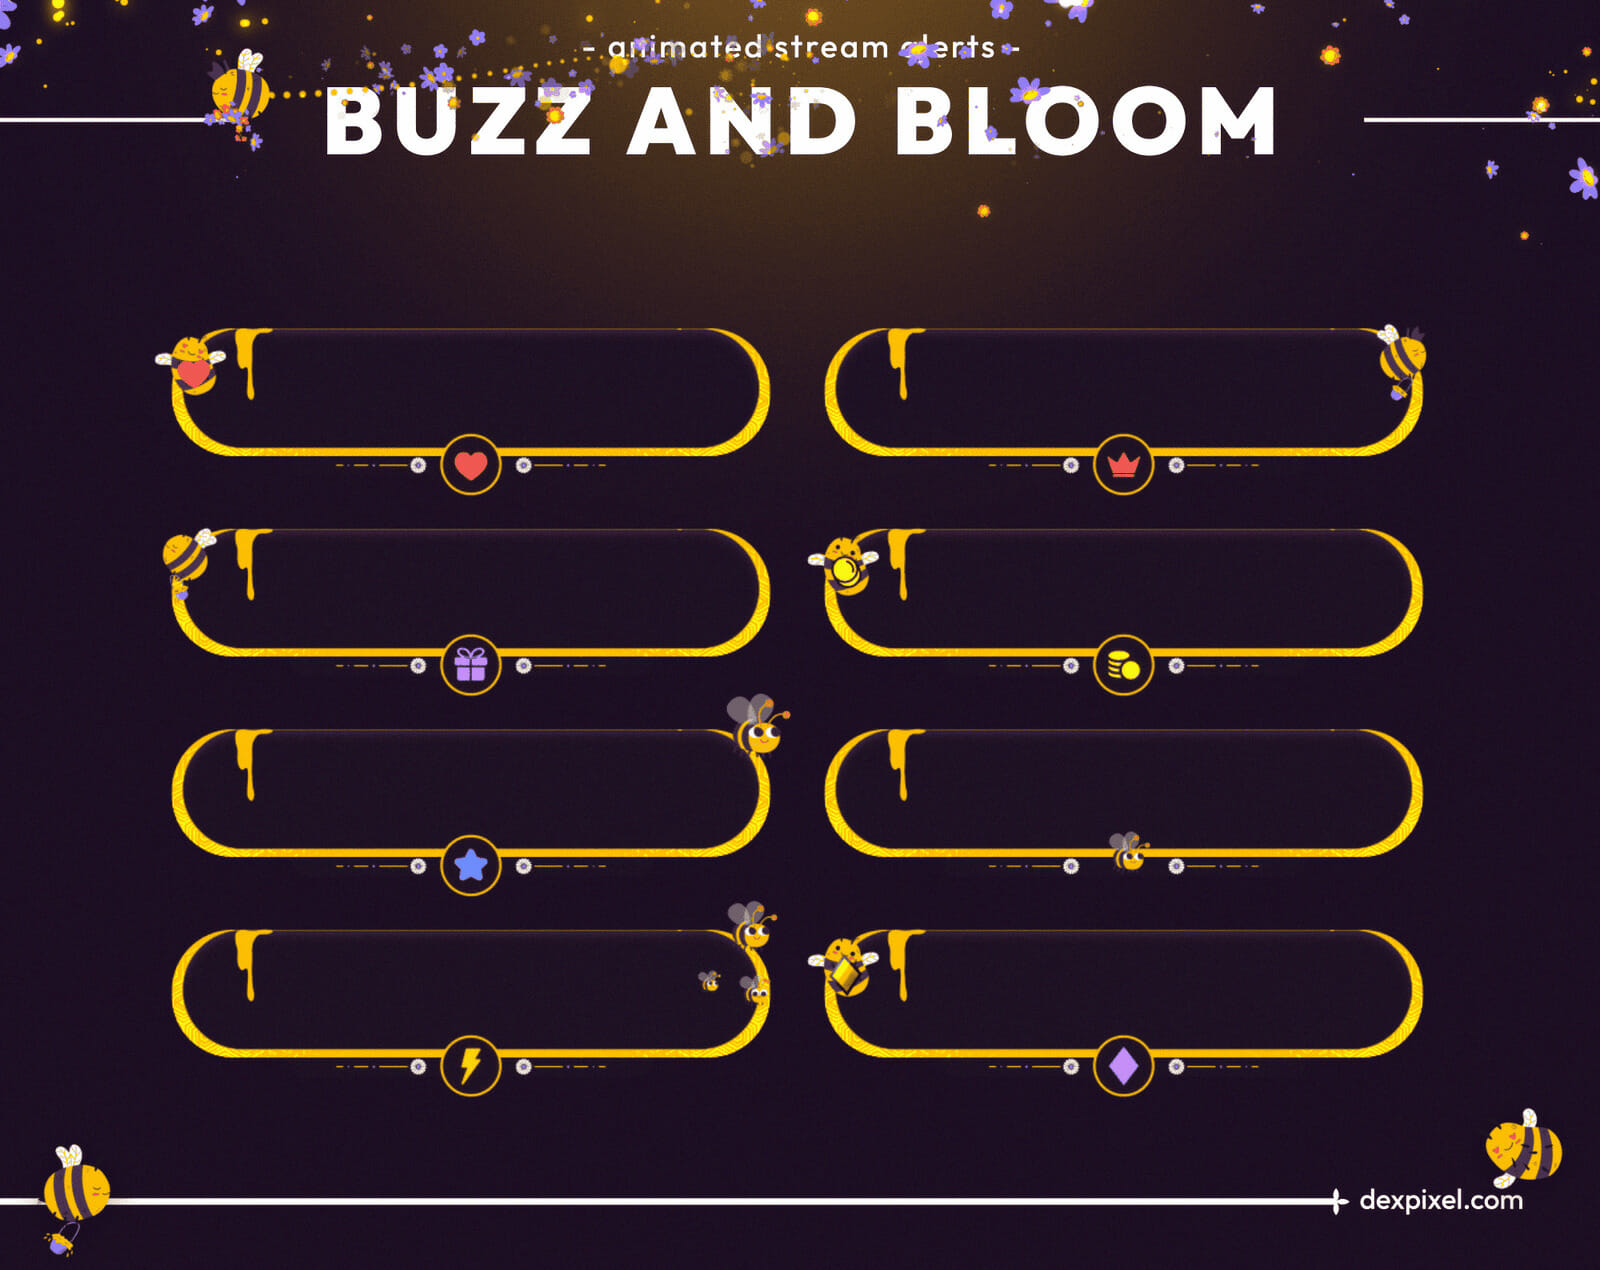 Buzz and Bloom Animated Stream Alerts 4